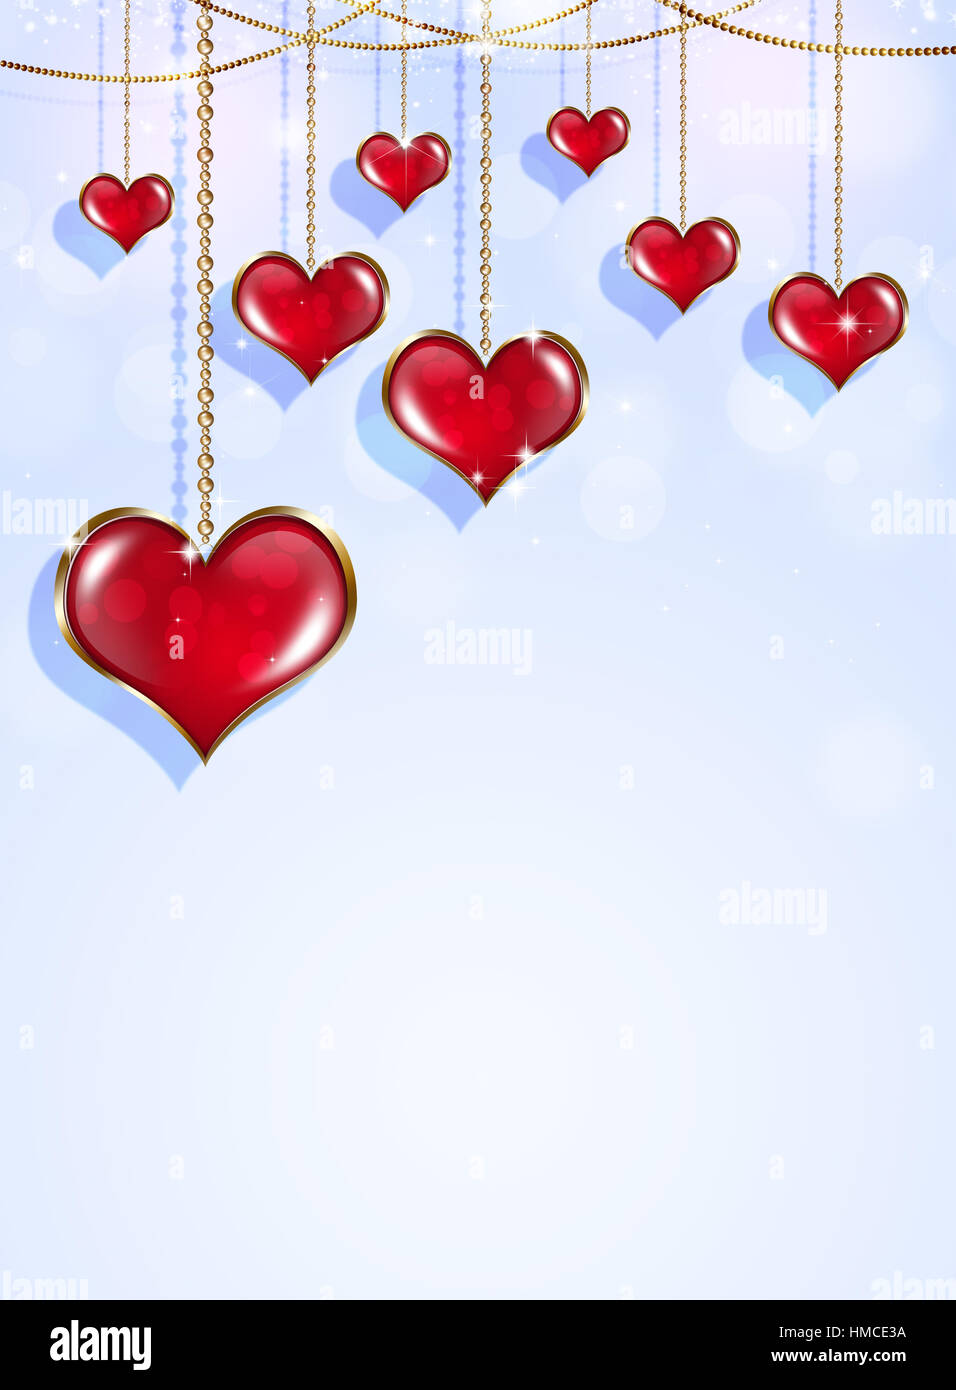 valentines day decoration with red hearts and lights Stock Photo